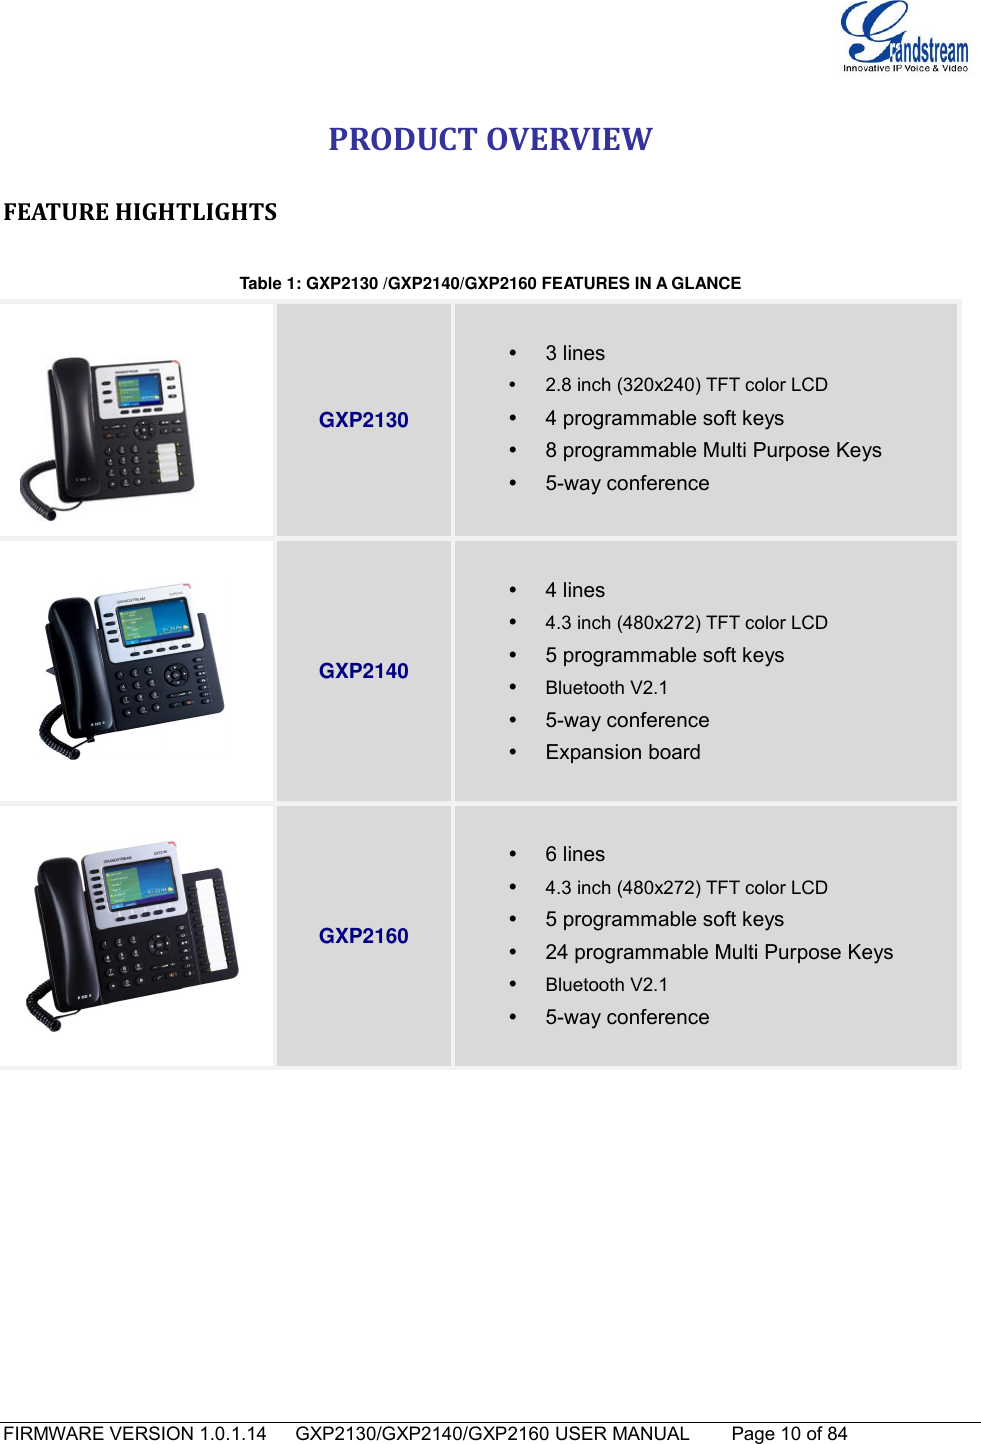   FIRMWARE VERSION 1.0.1.14      GXP2130/GXP2140/GXP2160 USER MANUAL     Page 10 of 84                                   PRODUCT OVERVIEW FEATURE HIGHTLIGHTS  Table 1: GXP2130 /GXP2140/GXP2160 FEATURES IN A GLANCE      GXP2130    3 lines   2.8 inch (320x240) TFT color LCD   4 programmable soft keys   8 programmable Multi Purpose Keys     5-way conference   GXP2140    4 lines  4.3 inch (480x272) TFT color LCD   5 programmable soft keys  Bluetooth V2.1   5-way conference   Expansion board    GXP2160    6 lines  4.3 inch (480x272) TFT color LCD   5 programmable soft keys  24 programmable Multi Purpose Keys    Bluetooth V2.1   5-way conference            